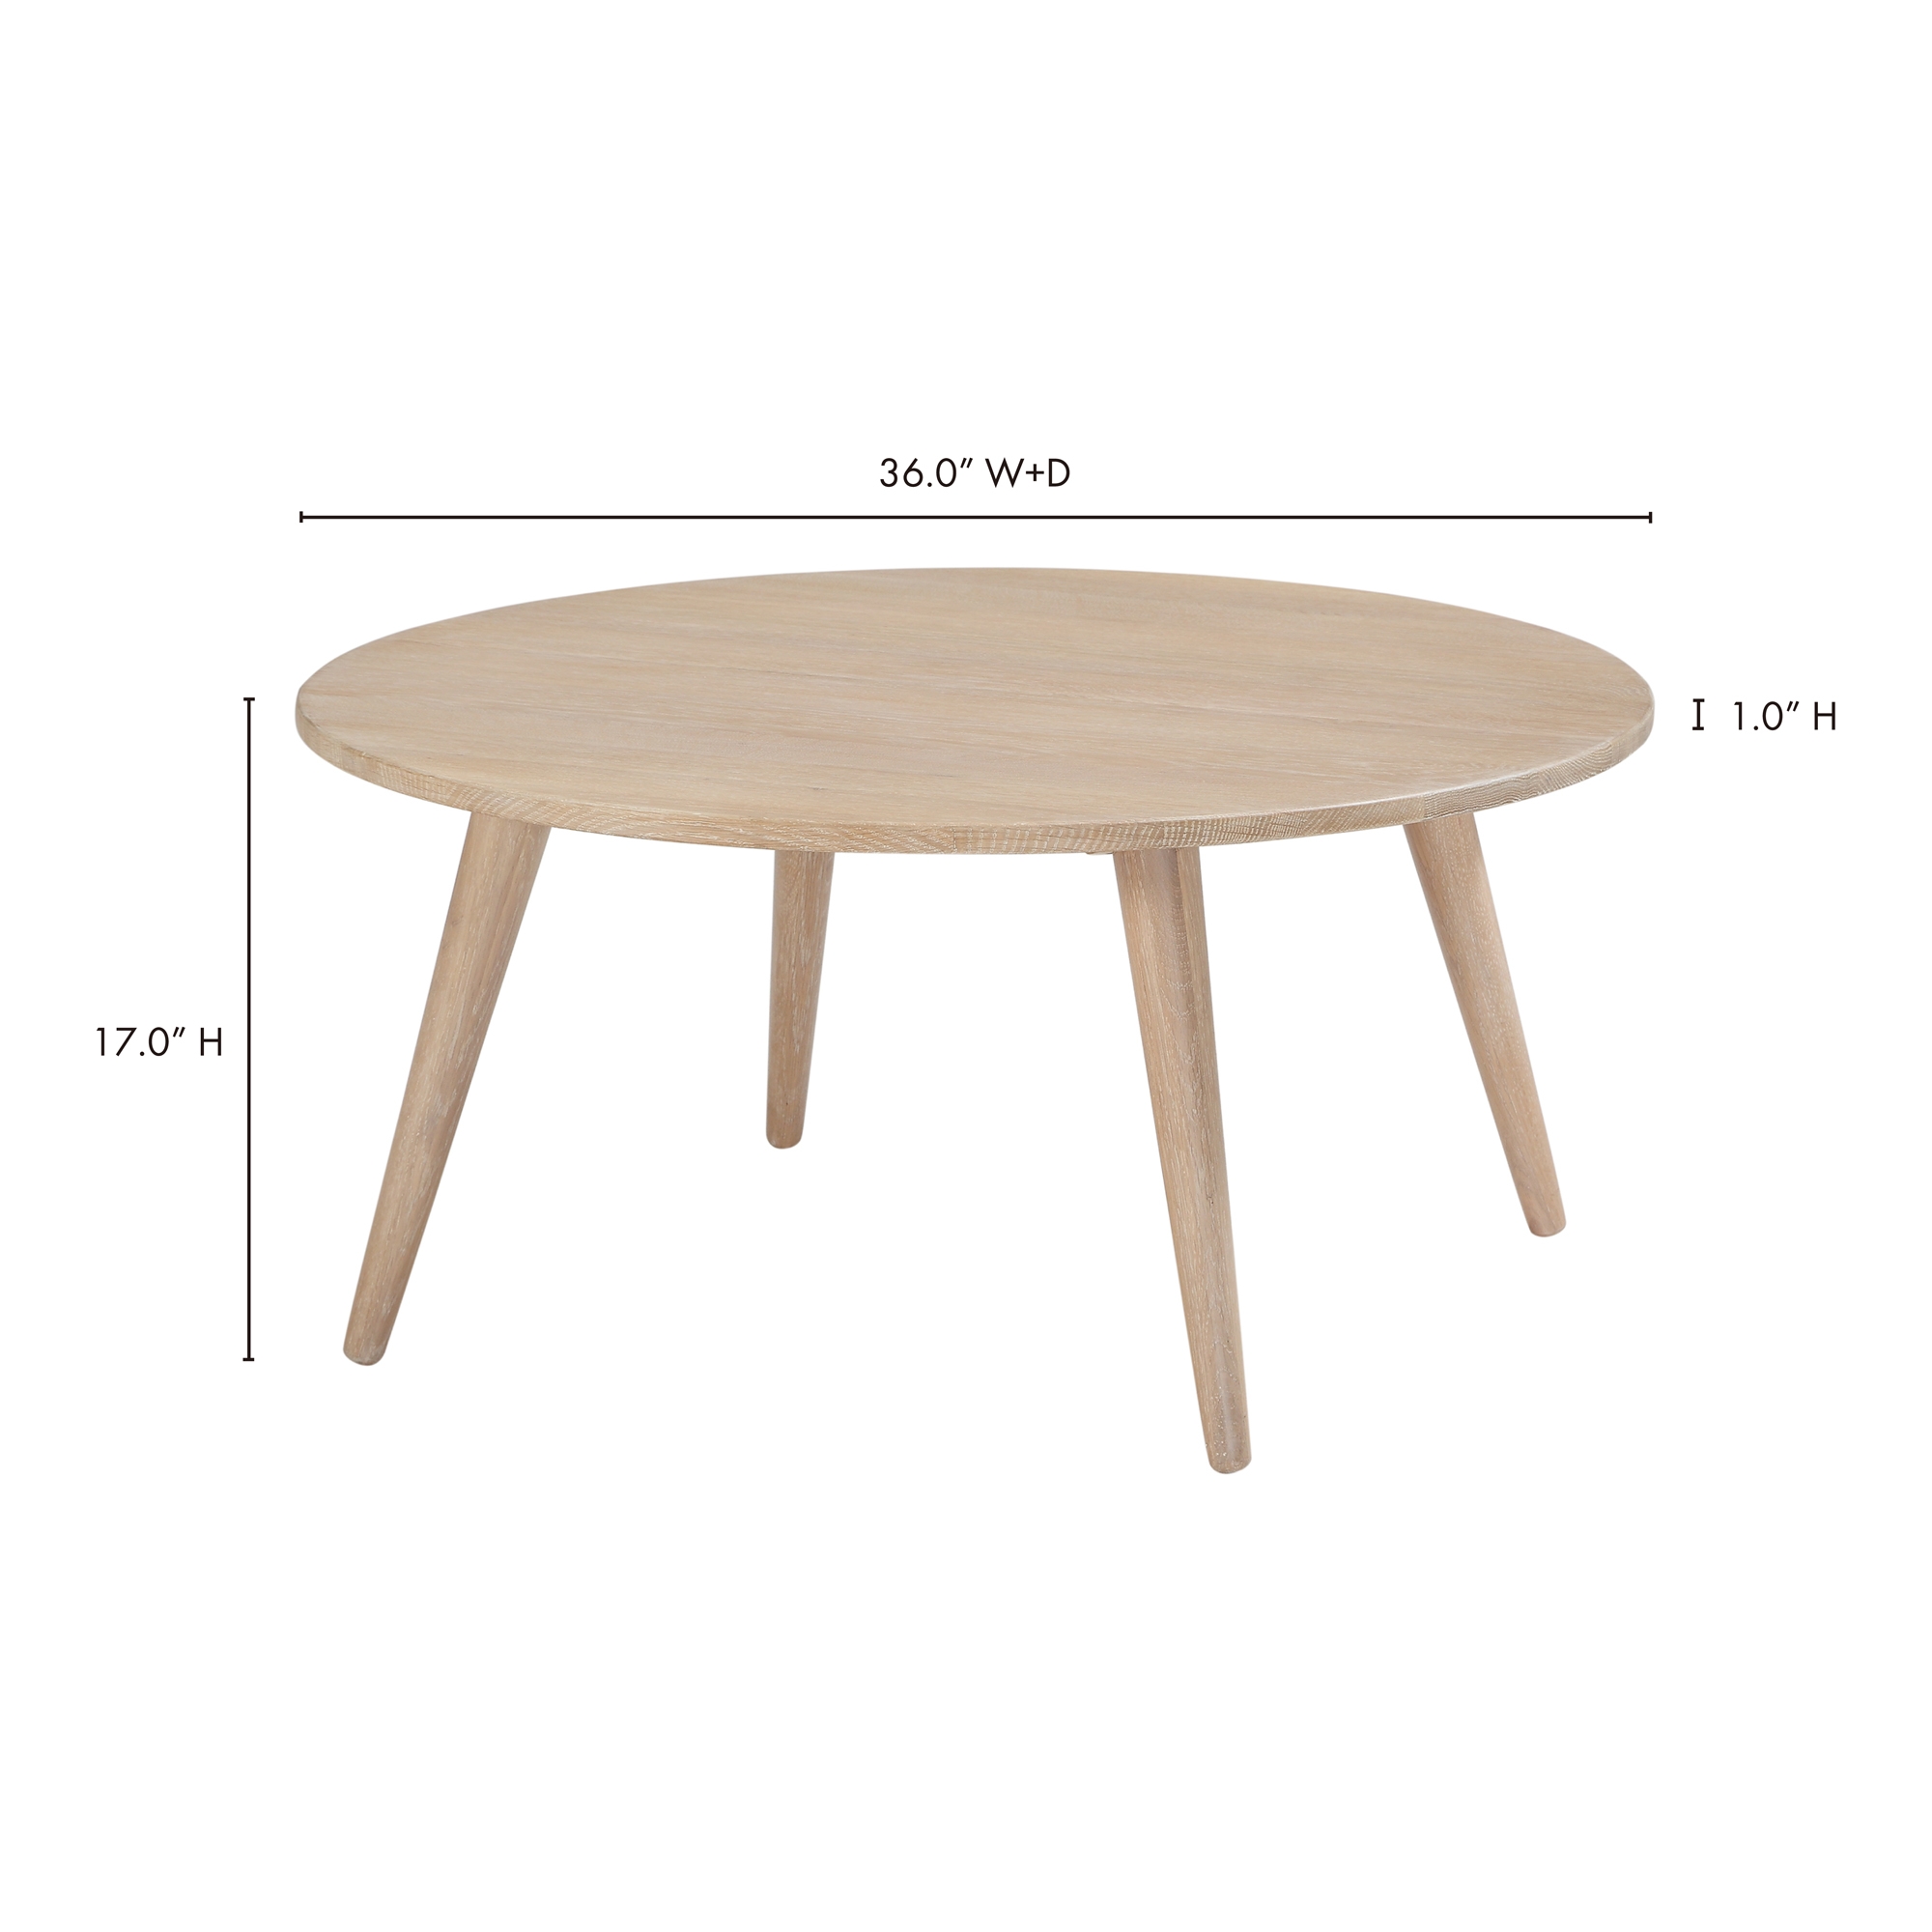 ARIANO COFFEE TABLE - Image 5